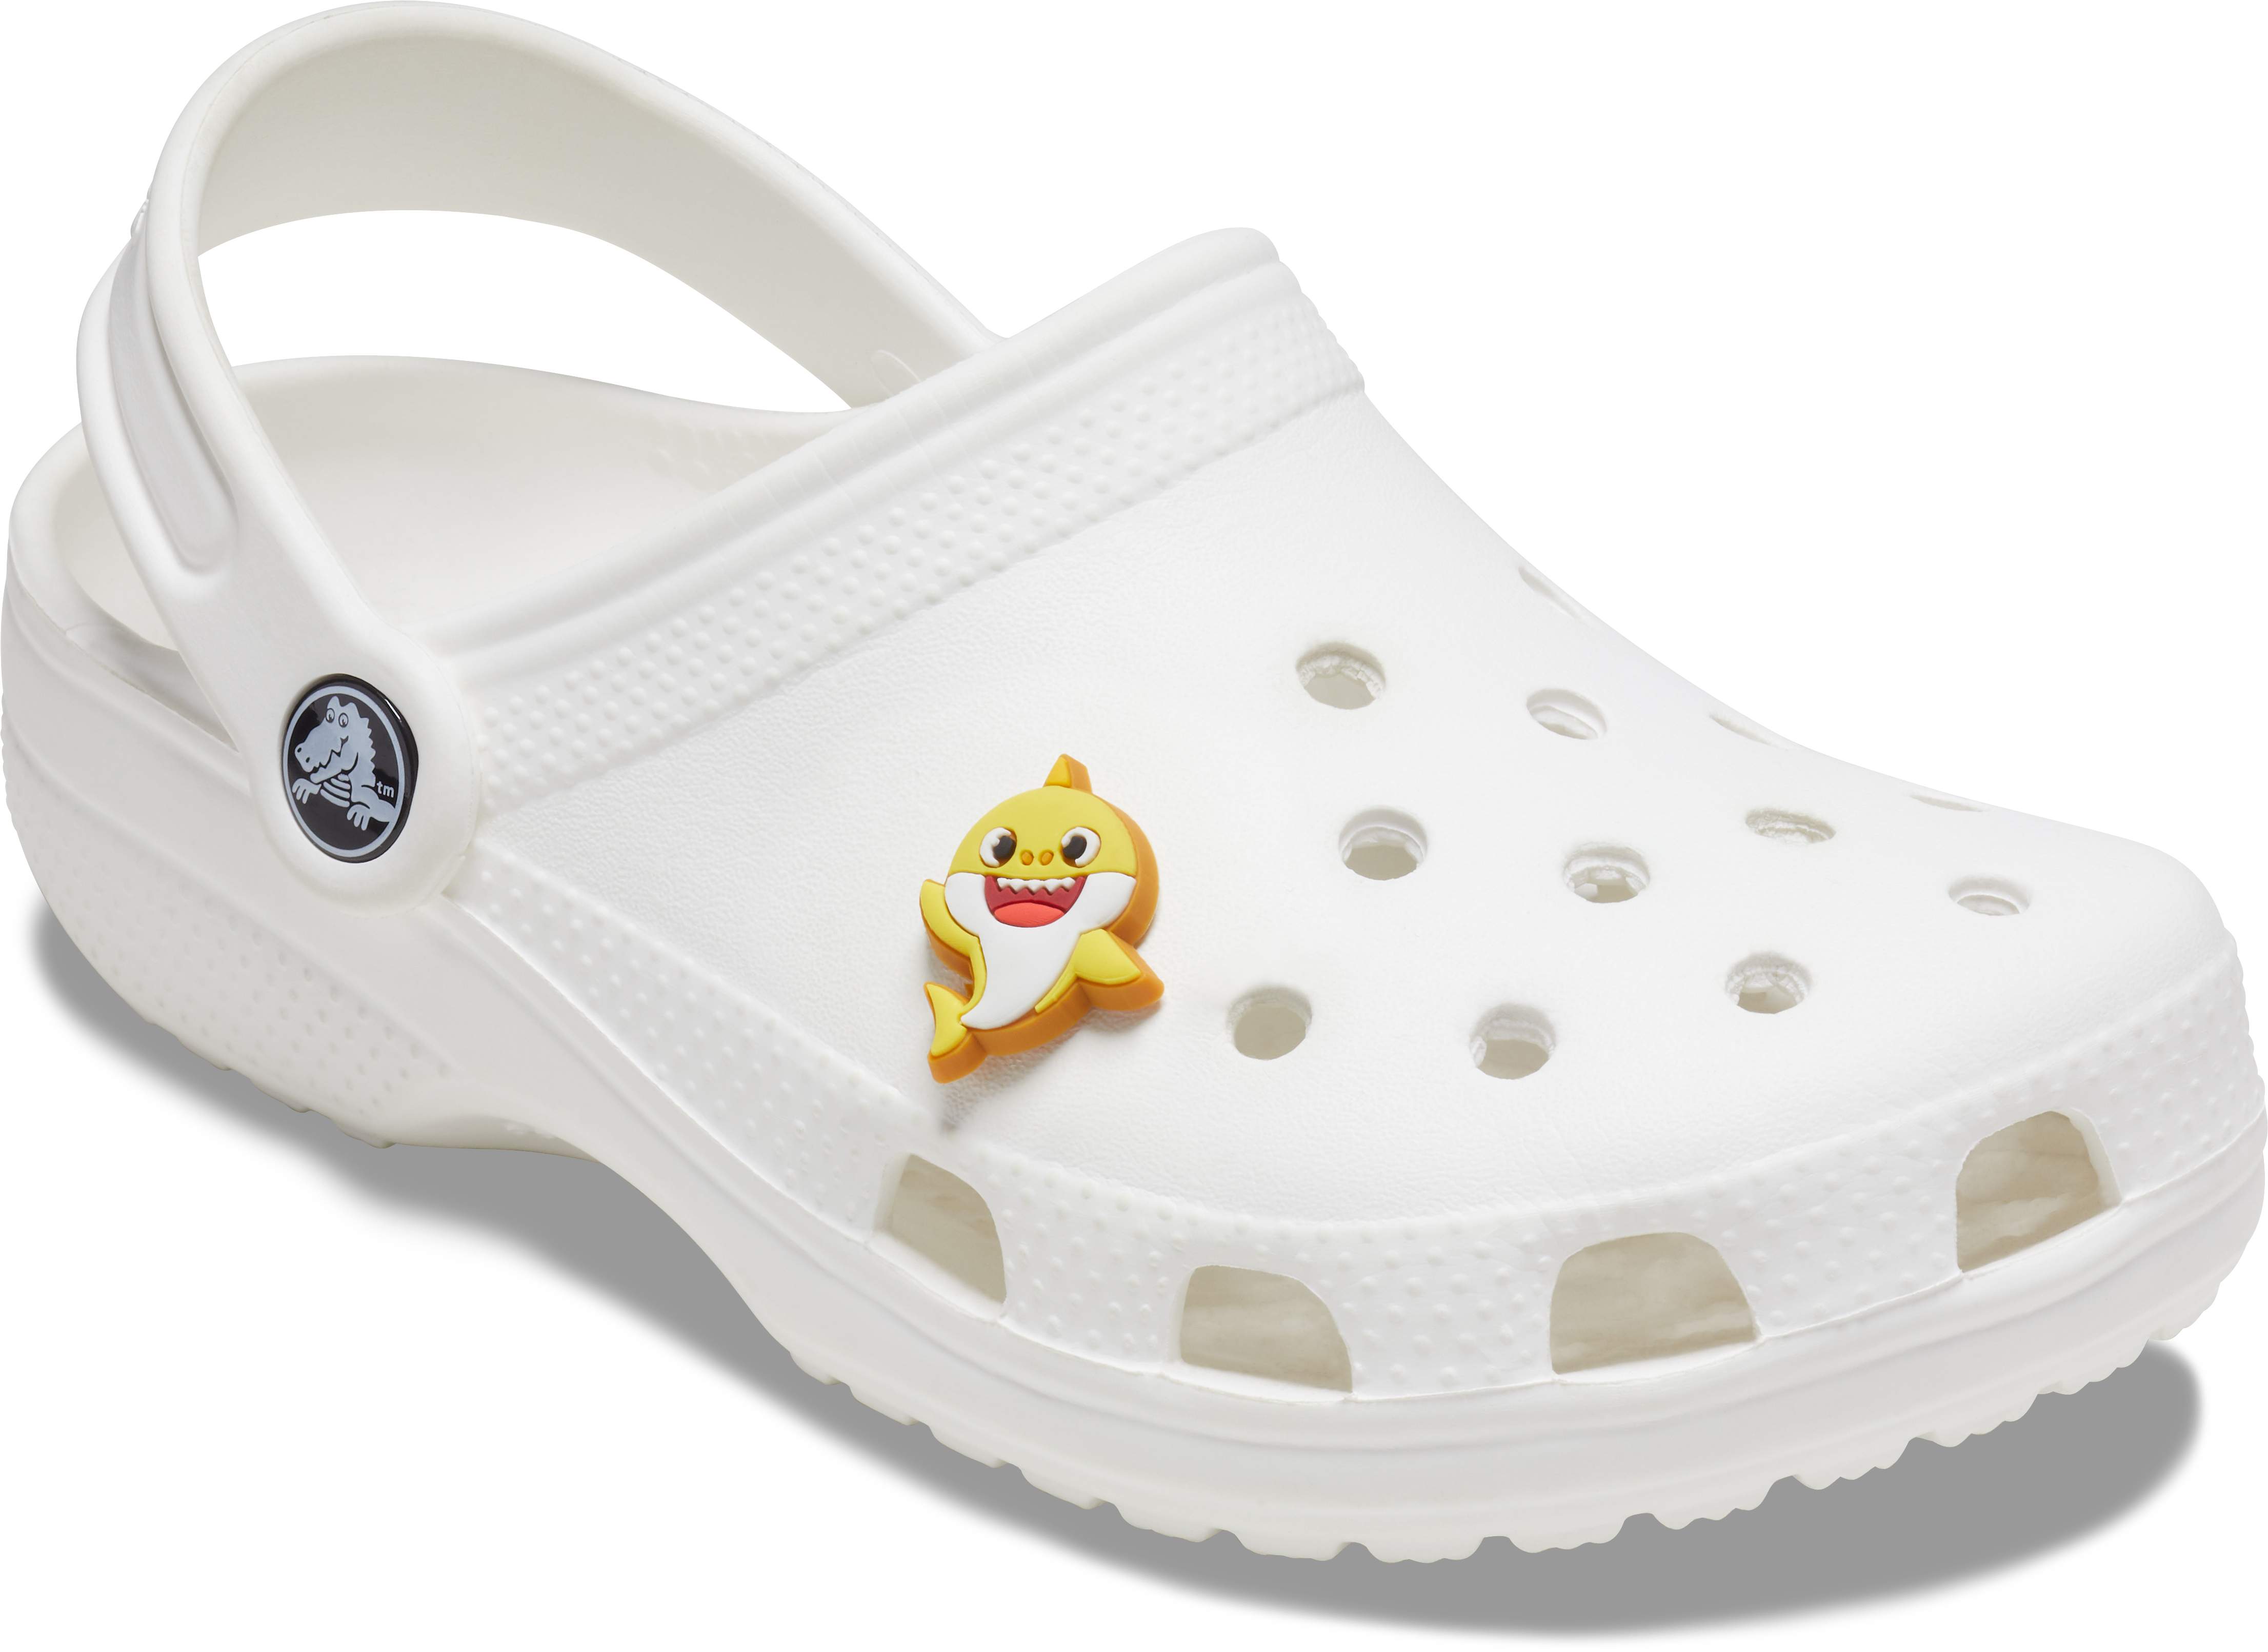 baby shark crocs for toddlers